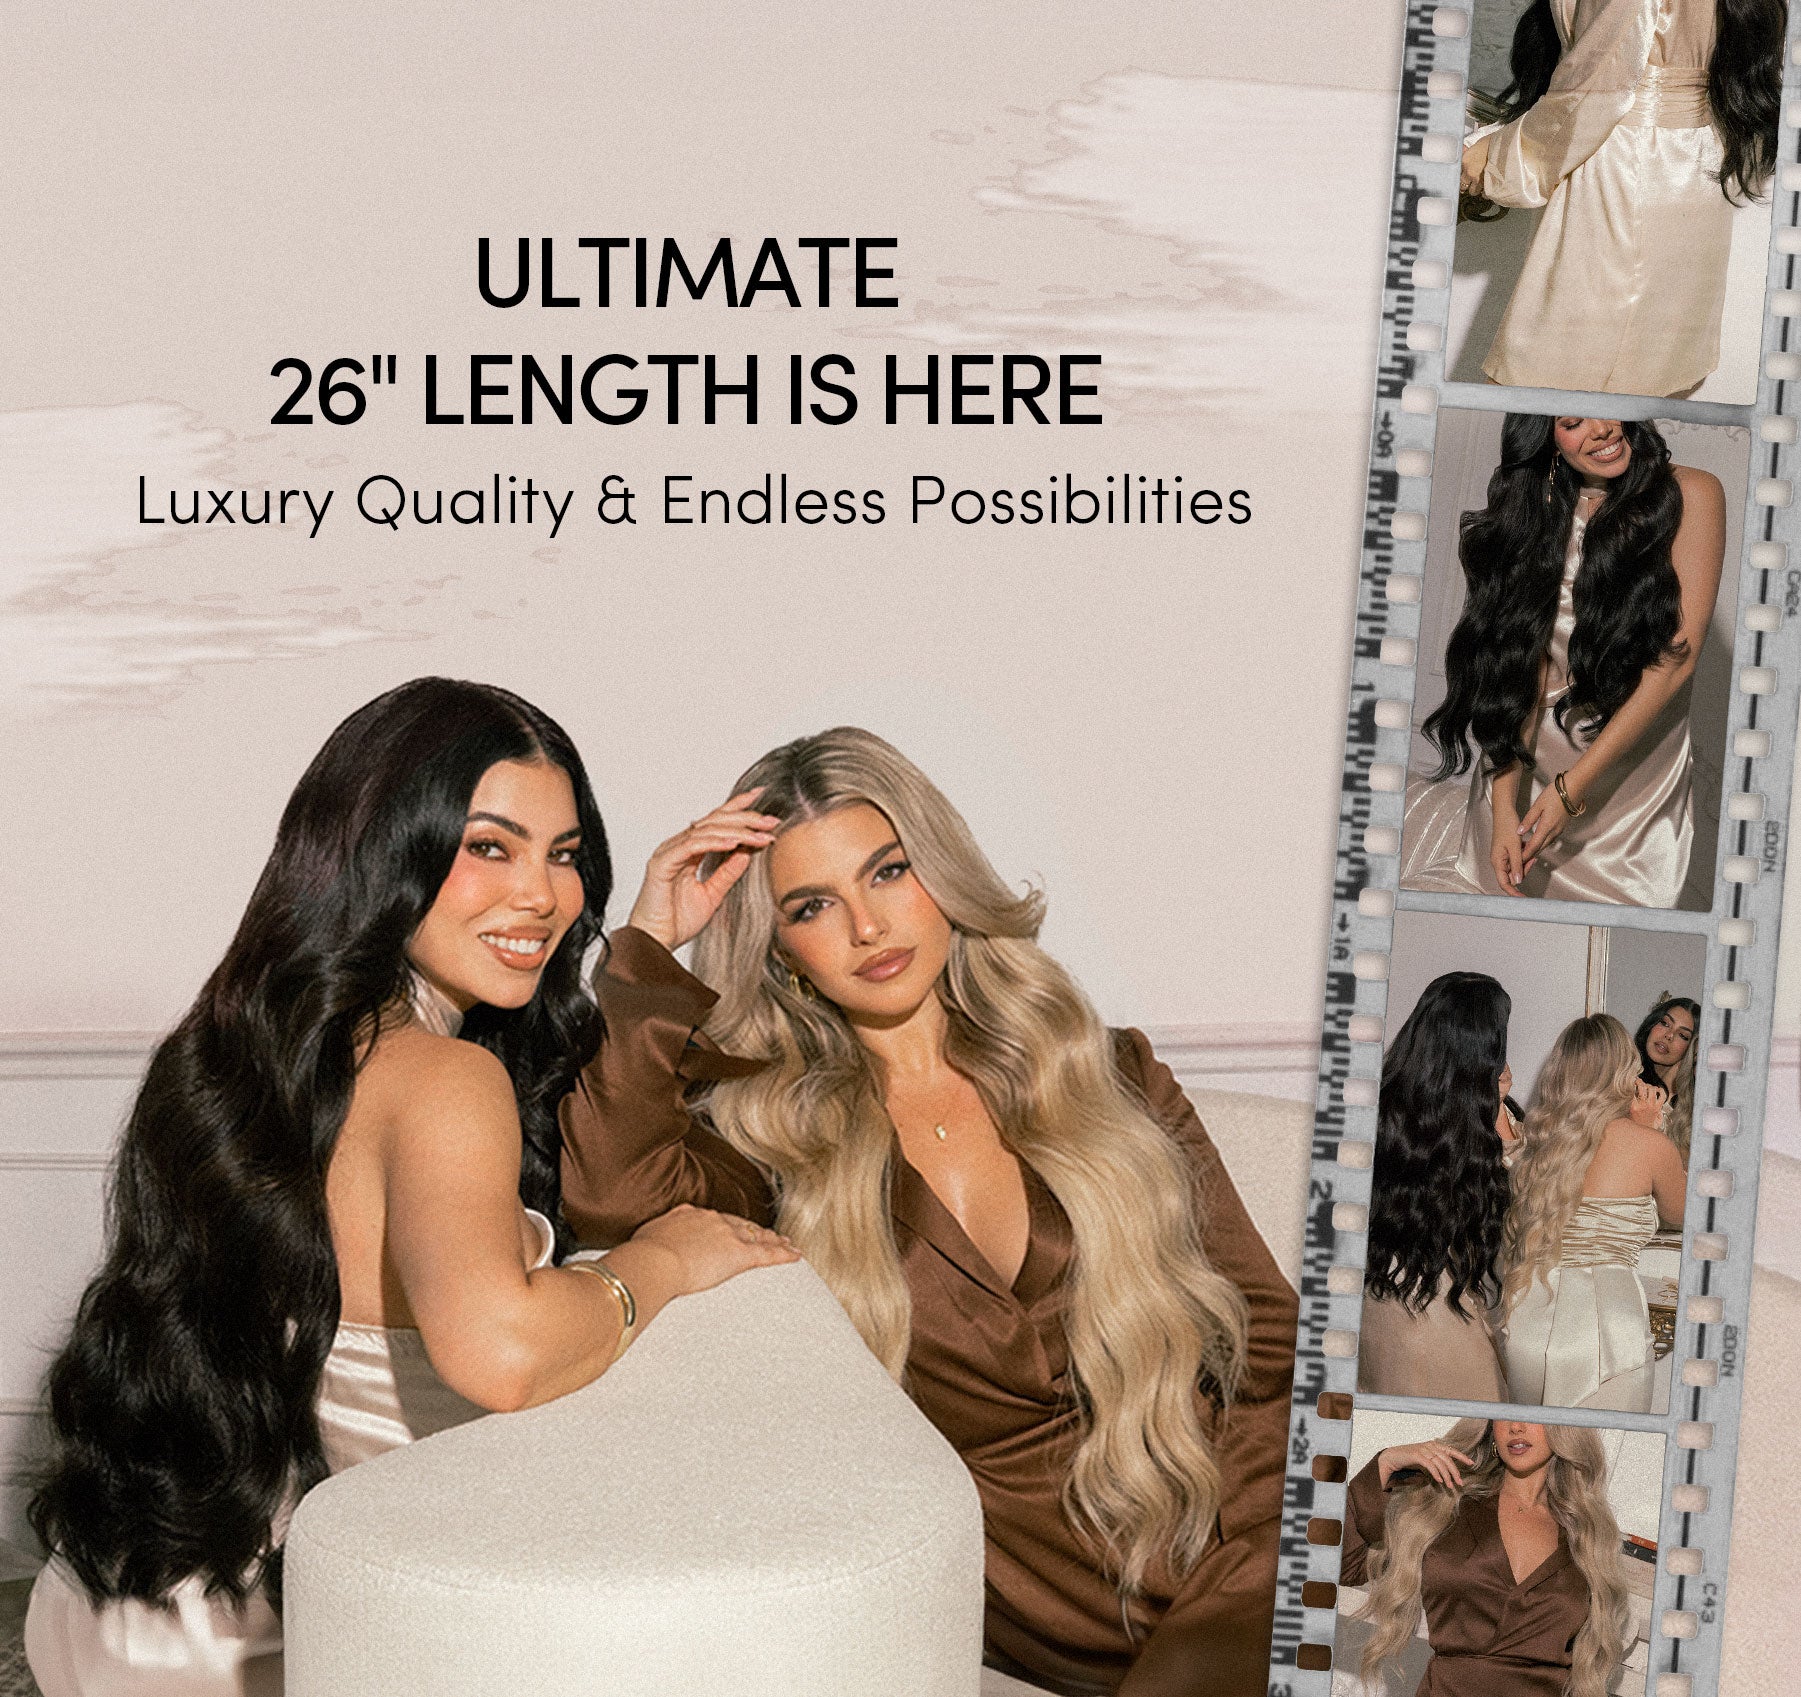 Ultimate 26" length is here | Luxury Quality & Endless Possibilities